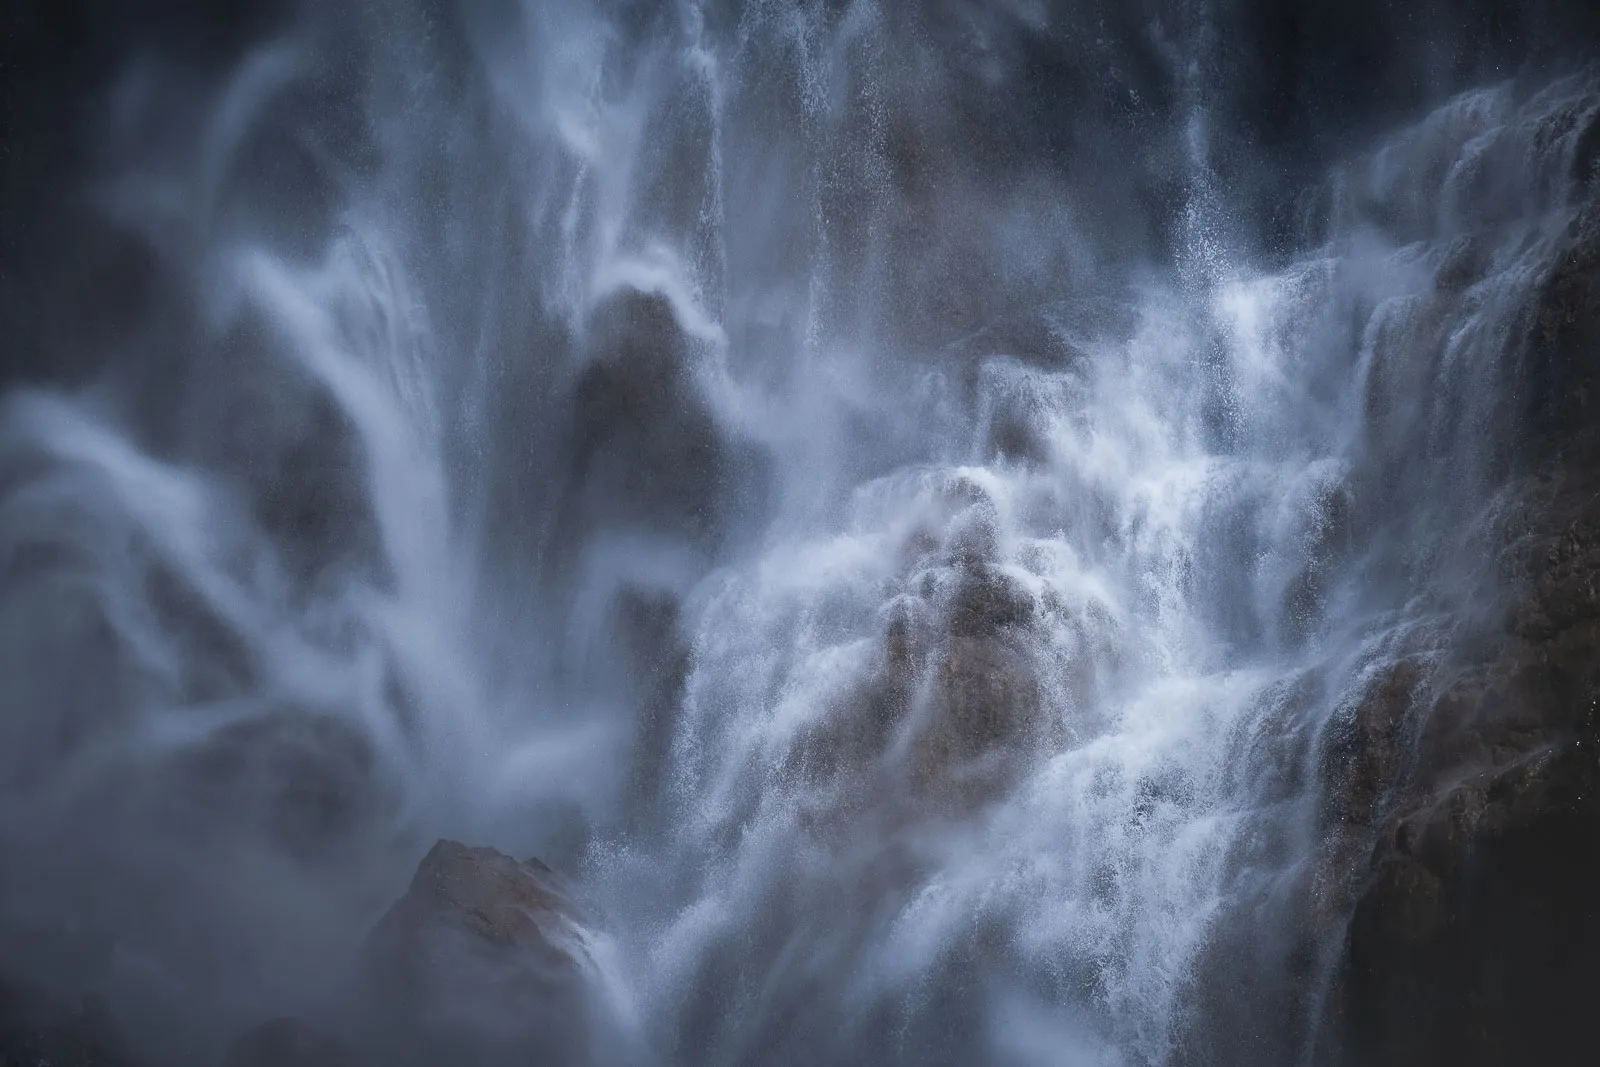 An abstract close up photo of Seerenbach Falls in Switzerland